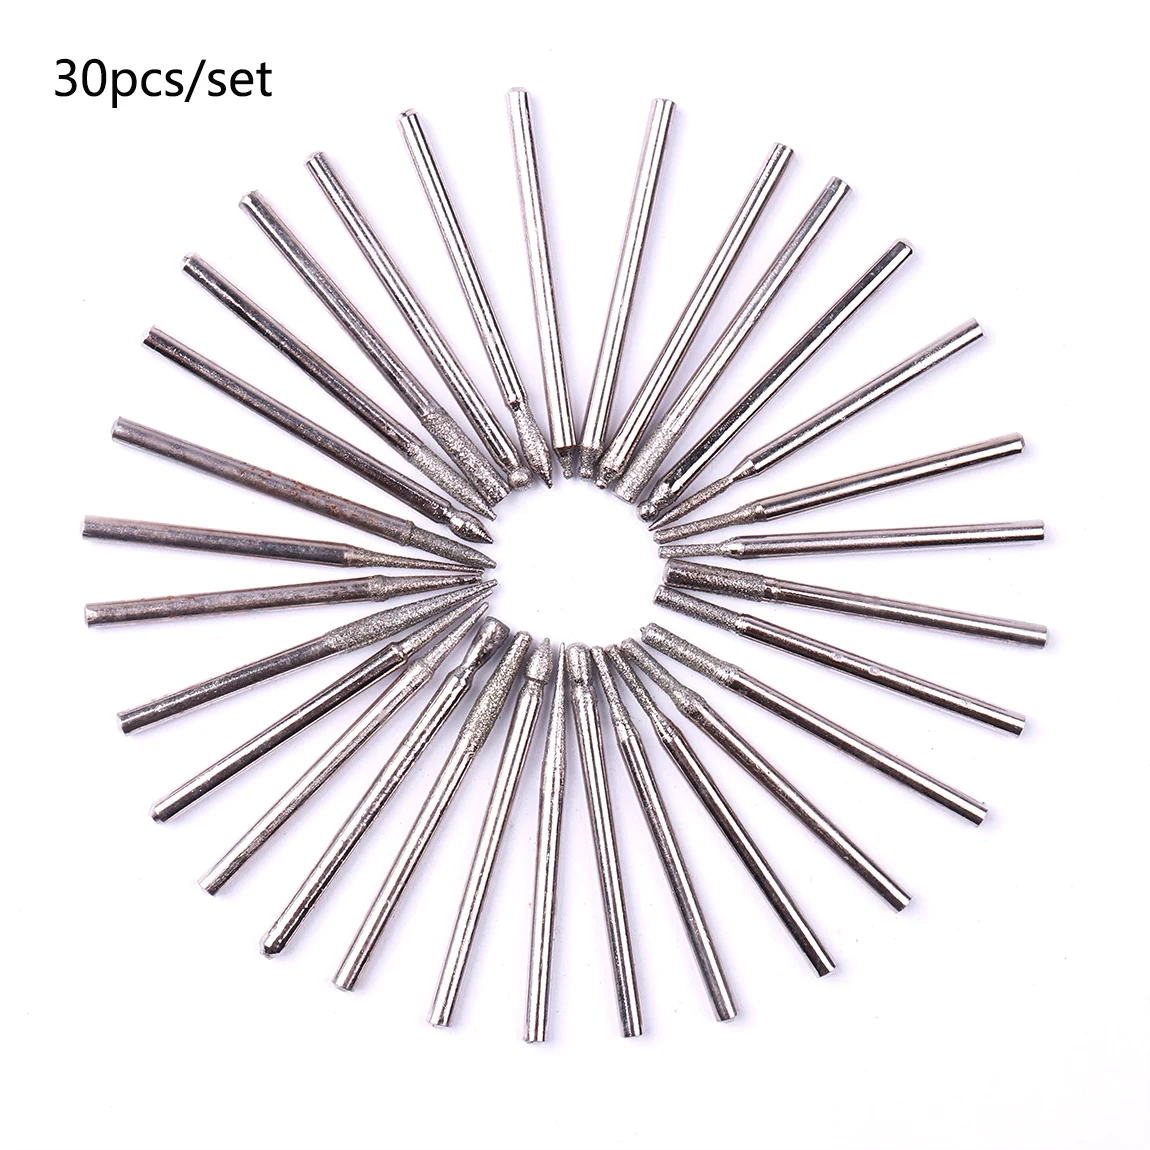 CHEERBRIGHT 30Pc Diamond Coated Cuticle Removal Nail Drill Set Rotary Grinding Burrs Glass Drill Bit DIYTool Set